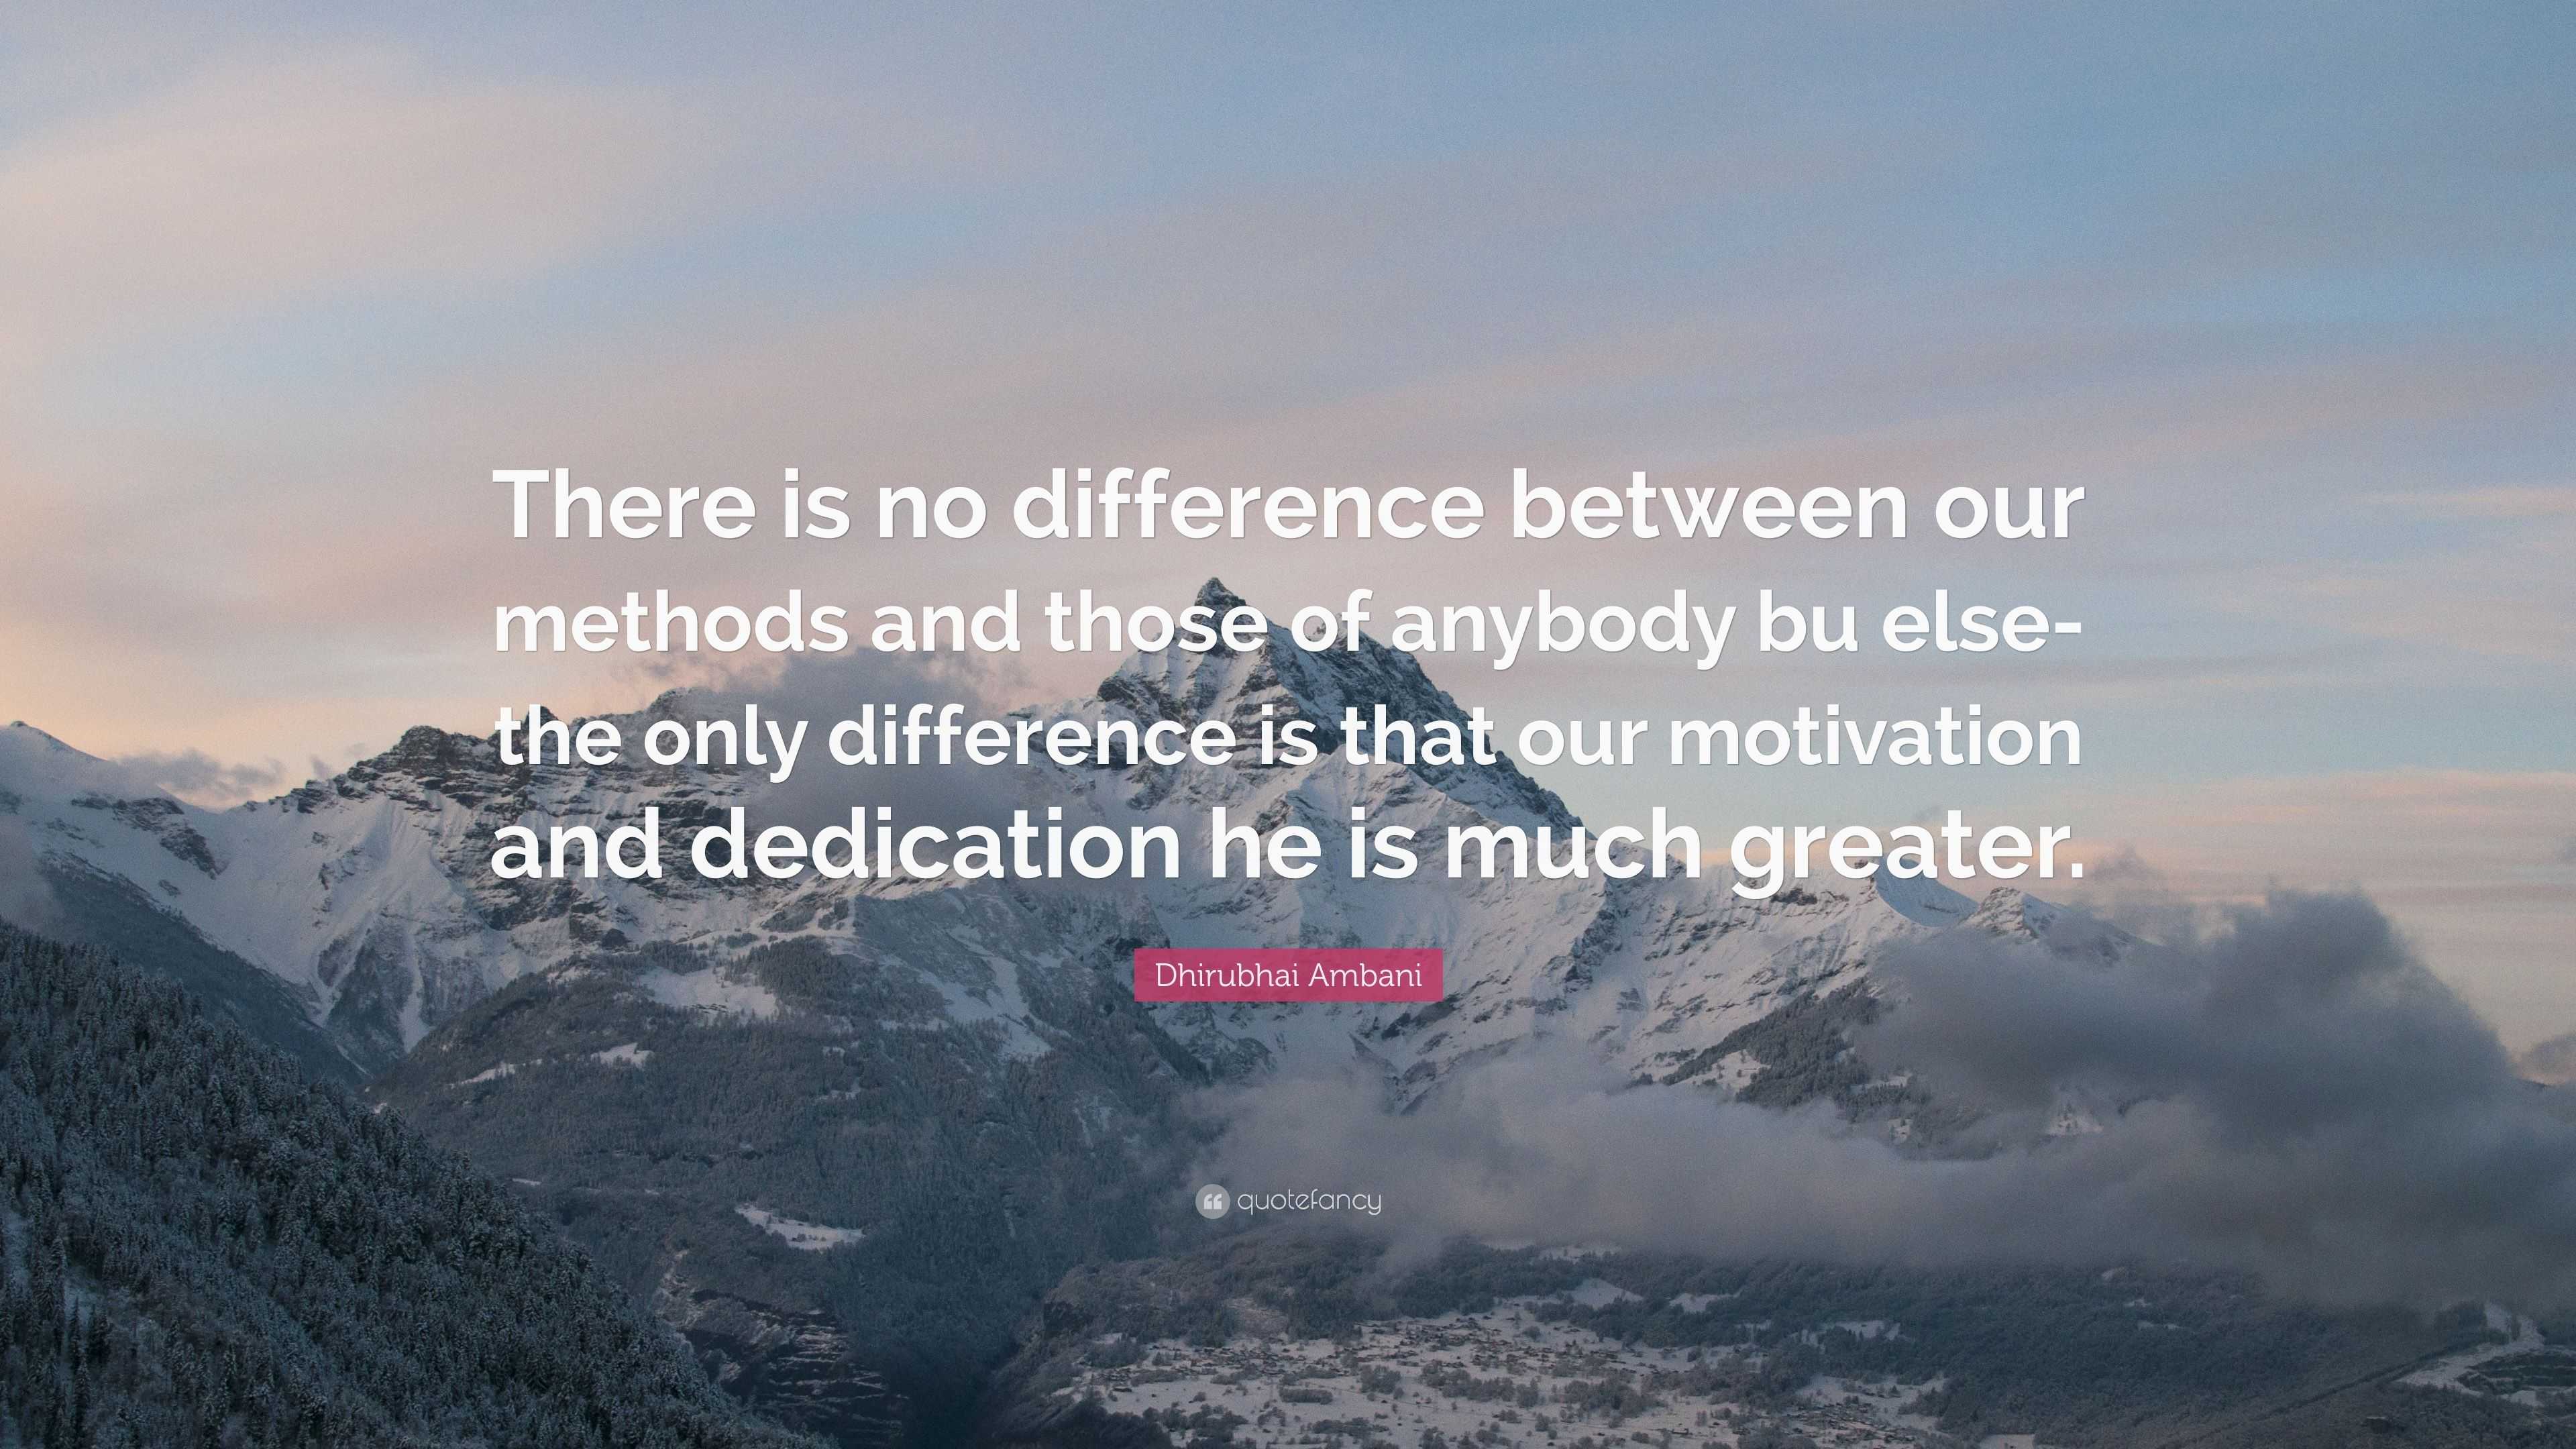 Dhirubhai Ambani Quote: “There is no difference between our methods and ...